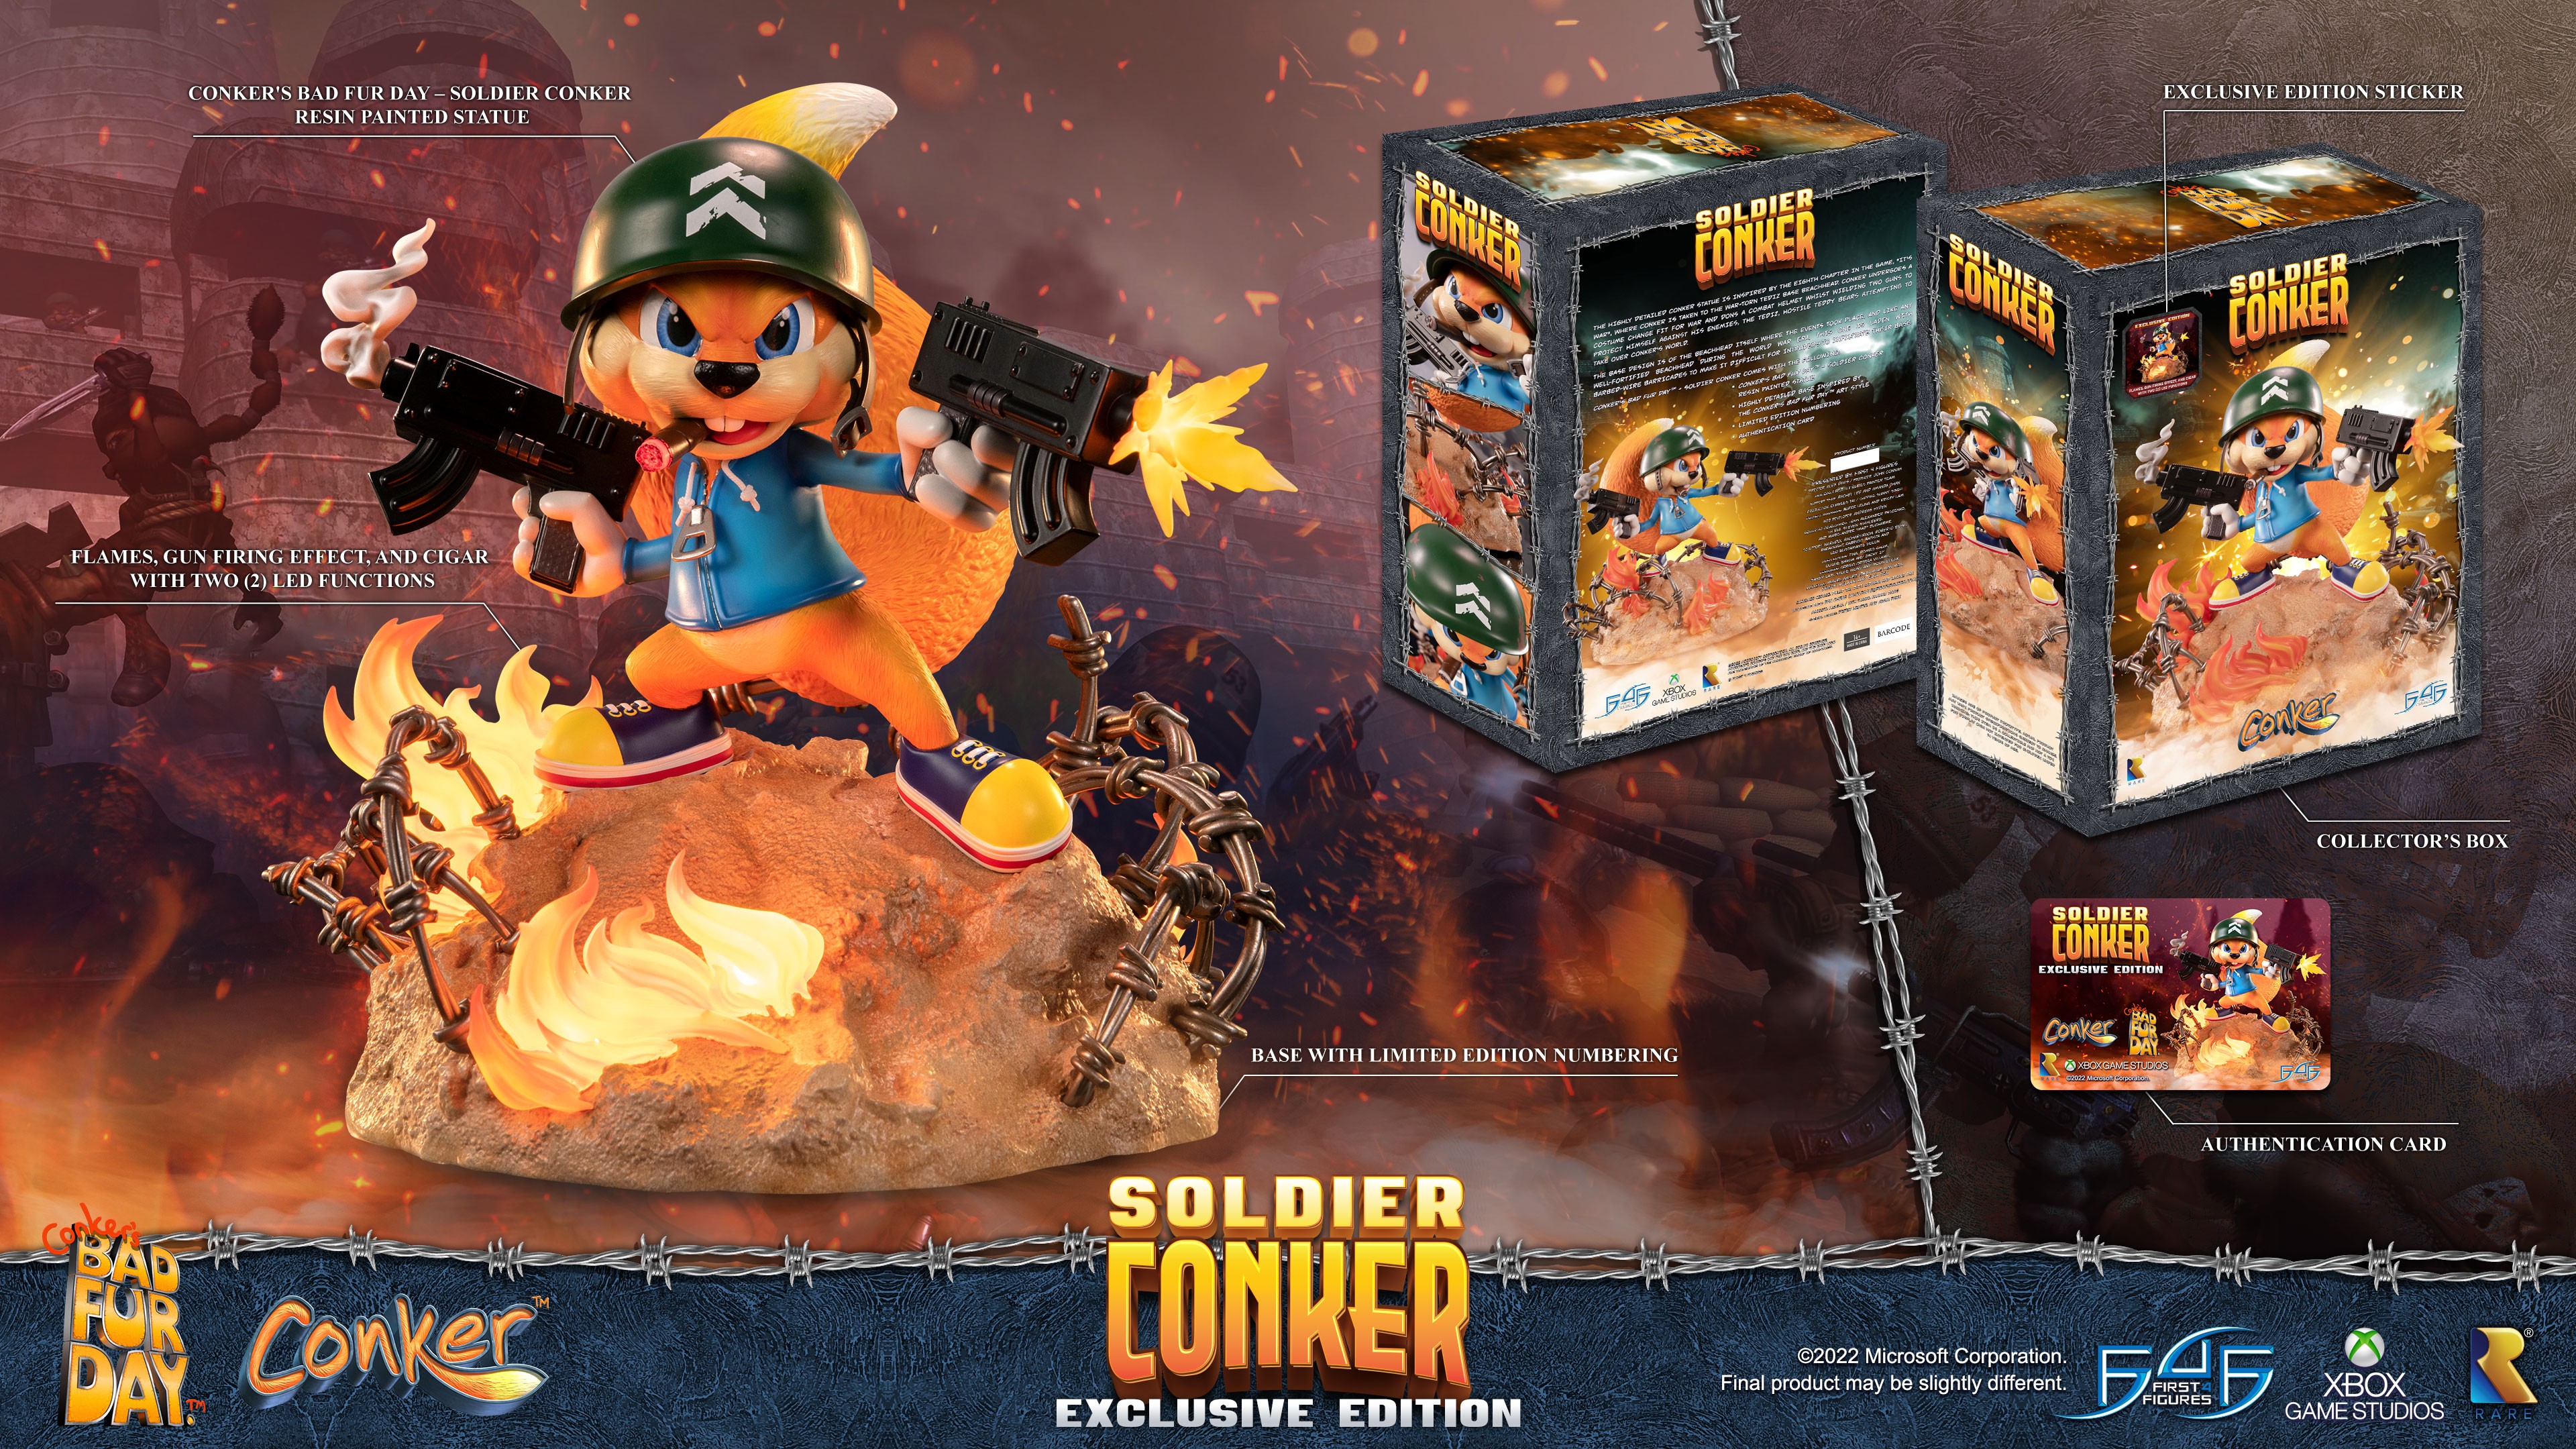 Conker: Conker's Bad Fur Day™ - Soldier Conker (Exclusive Edition)